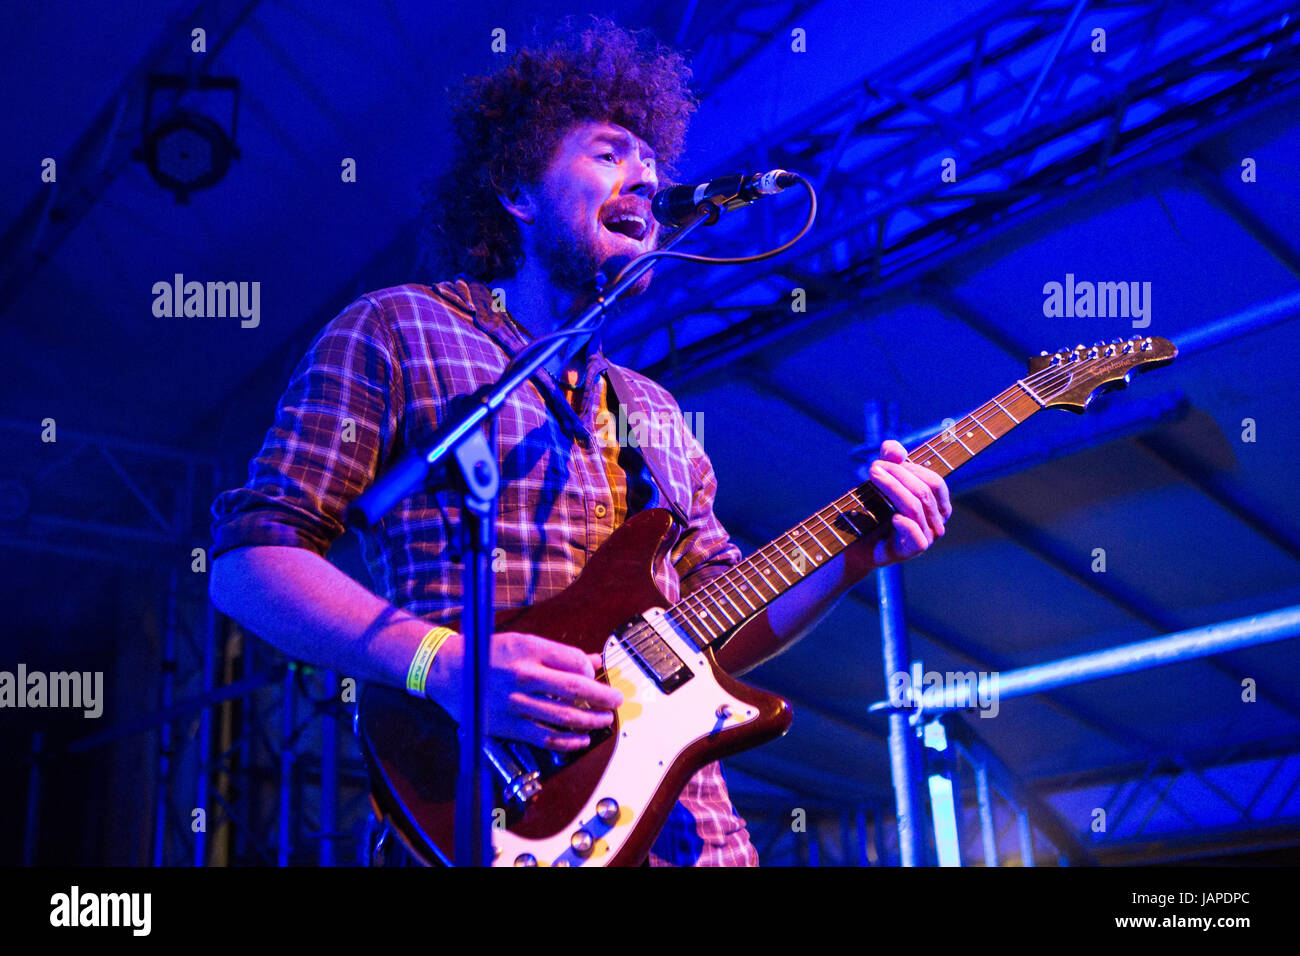 Milan Italy. 06th June 2017. The Australian psychedelic rock band POND performs live on stage at Circolo Magnolia during 'The Weather Tour' Credit: Rodolfo Sassano/Alamy Live News Stock Photo